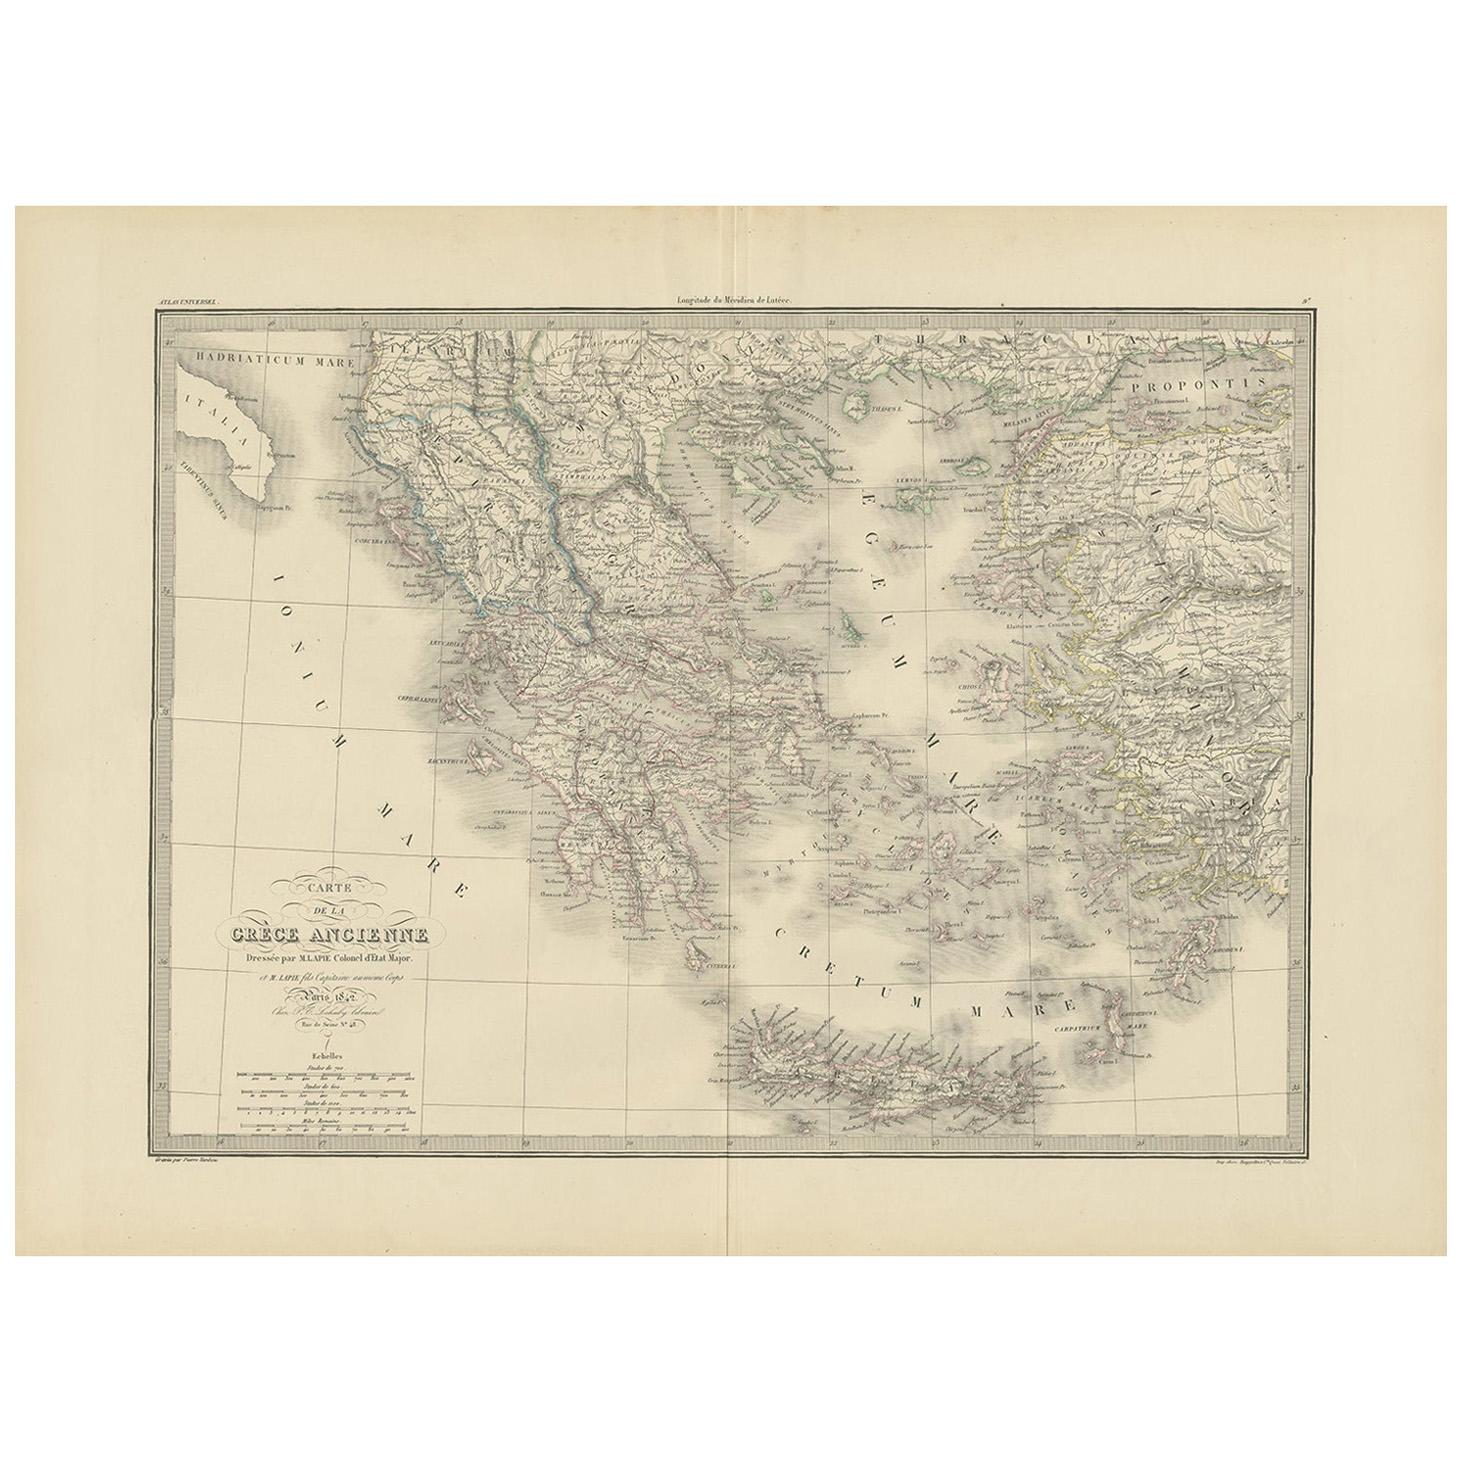 Antique Map of Greece by Lapie, 1842